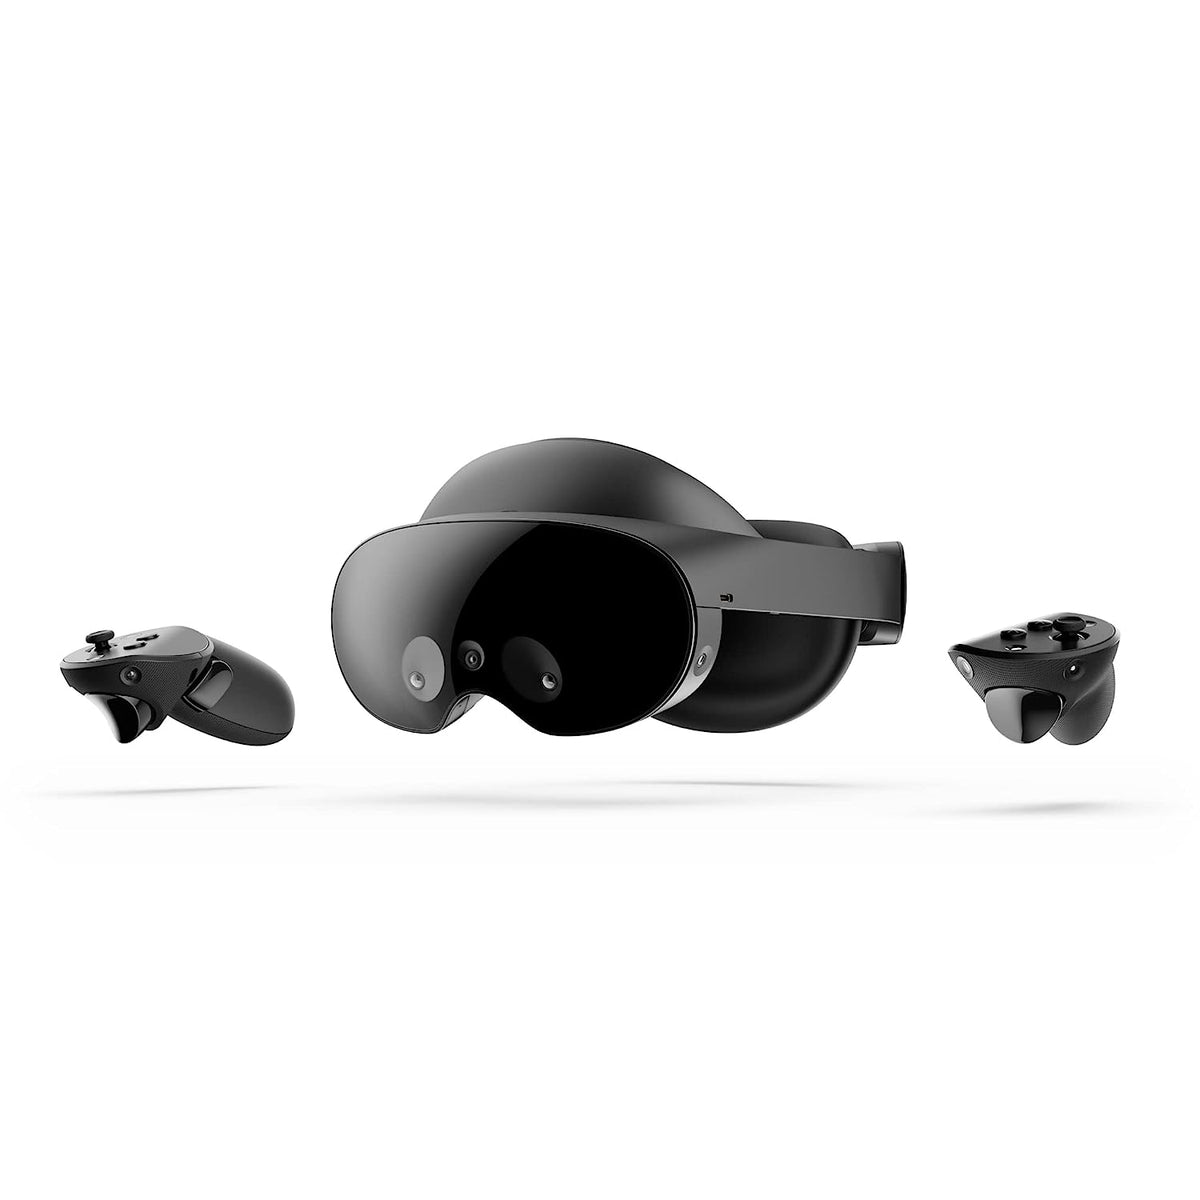 Meta Quest Pro — Advanced All-In-One Virtual Reality Headset